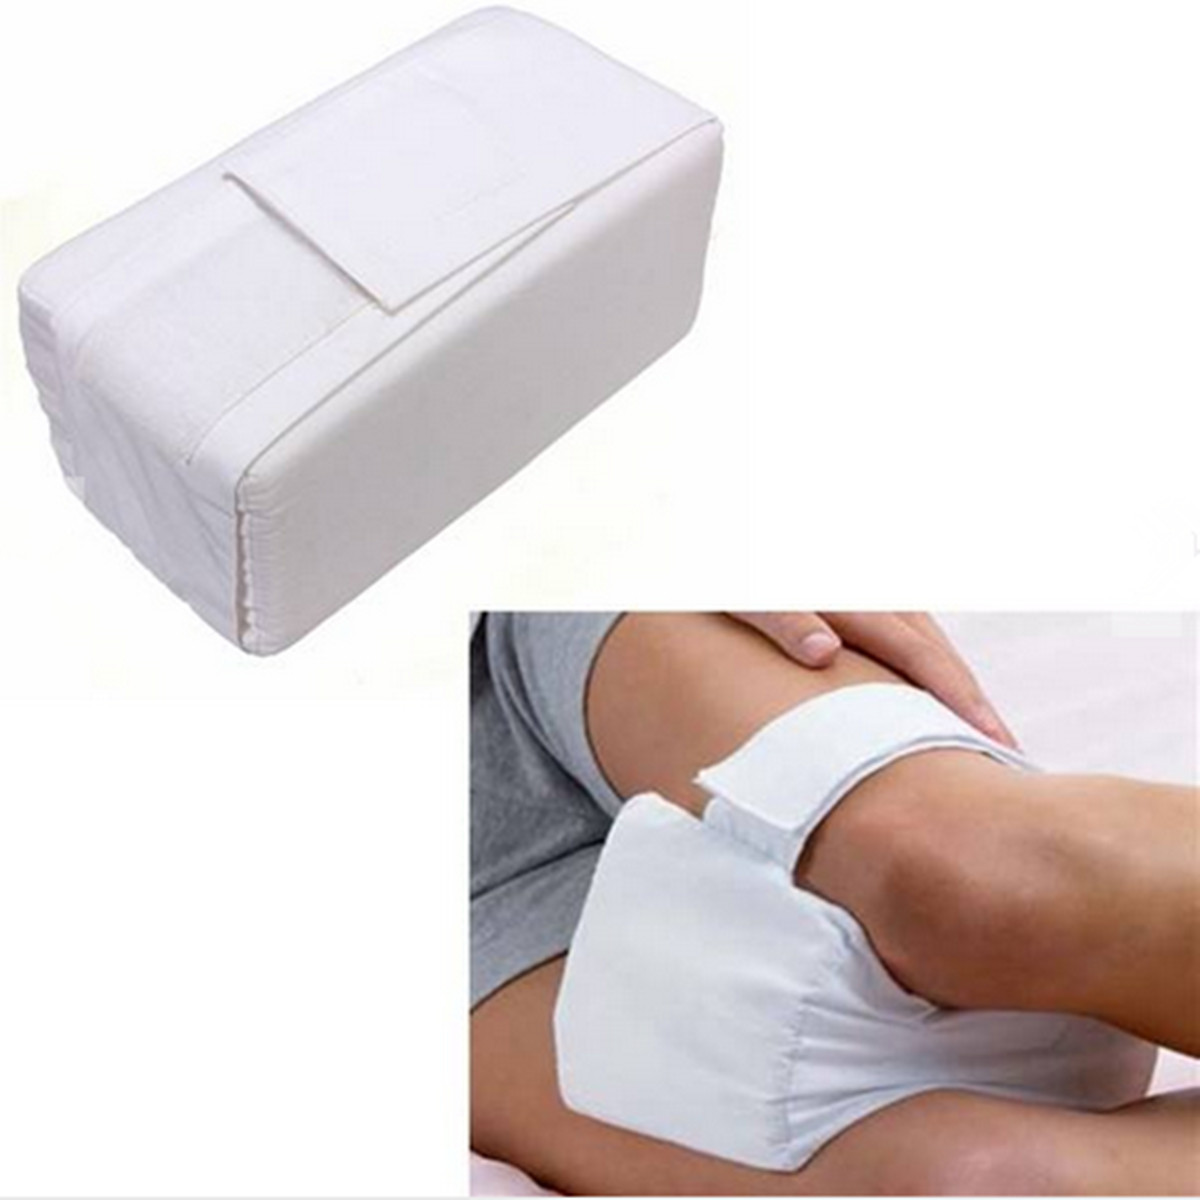 Sponge Knee Leg Pillow Bed Cushion Square Pressure Relief Sleep Support Pain-Aid 